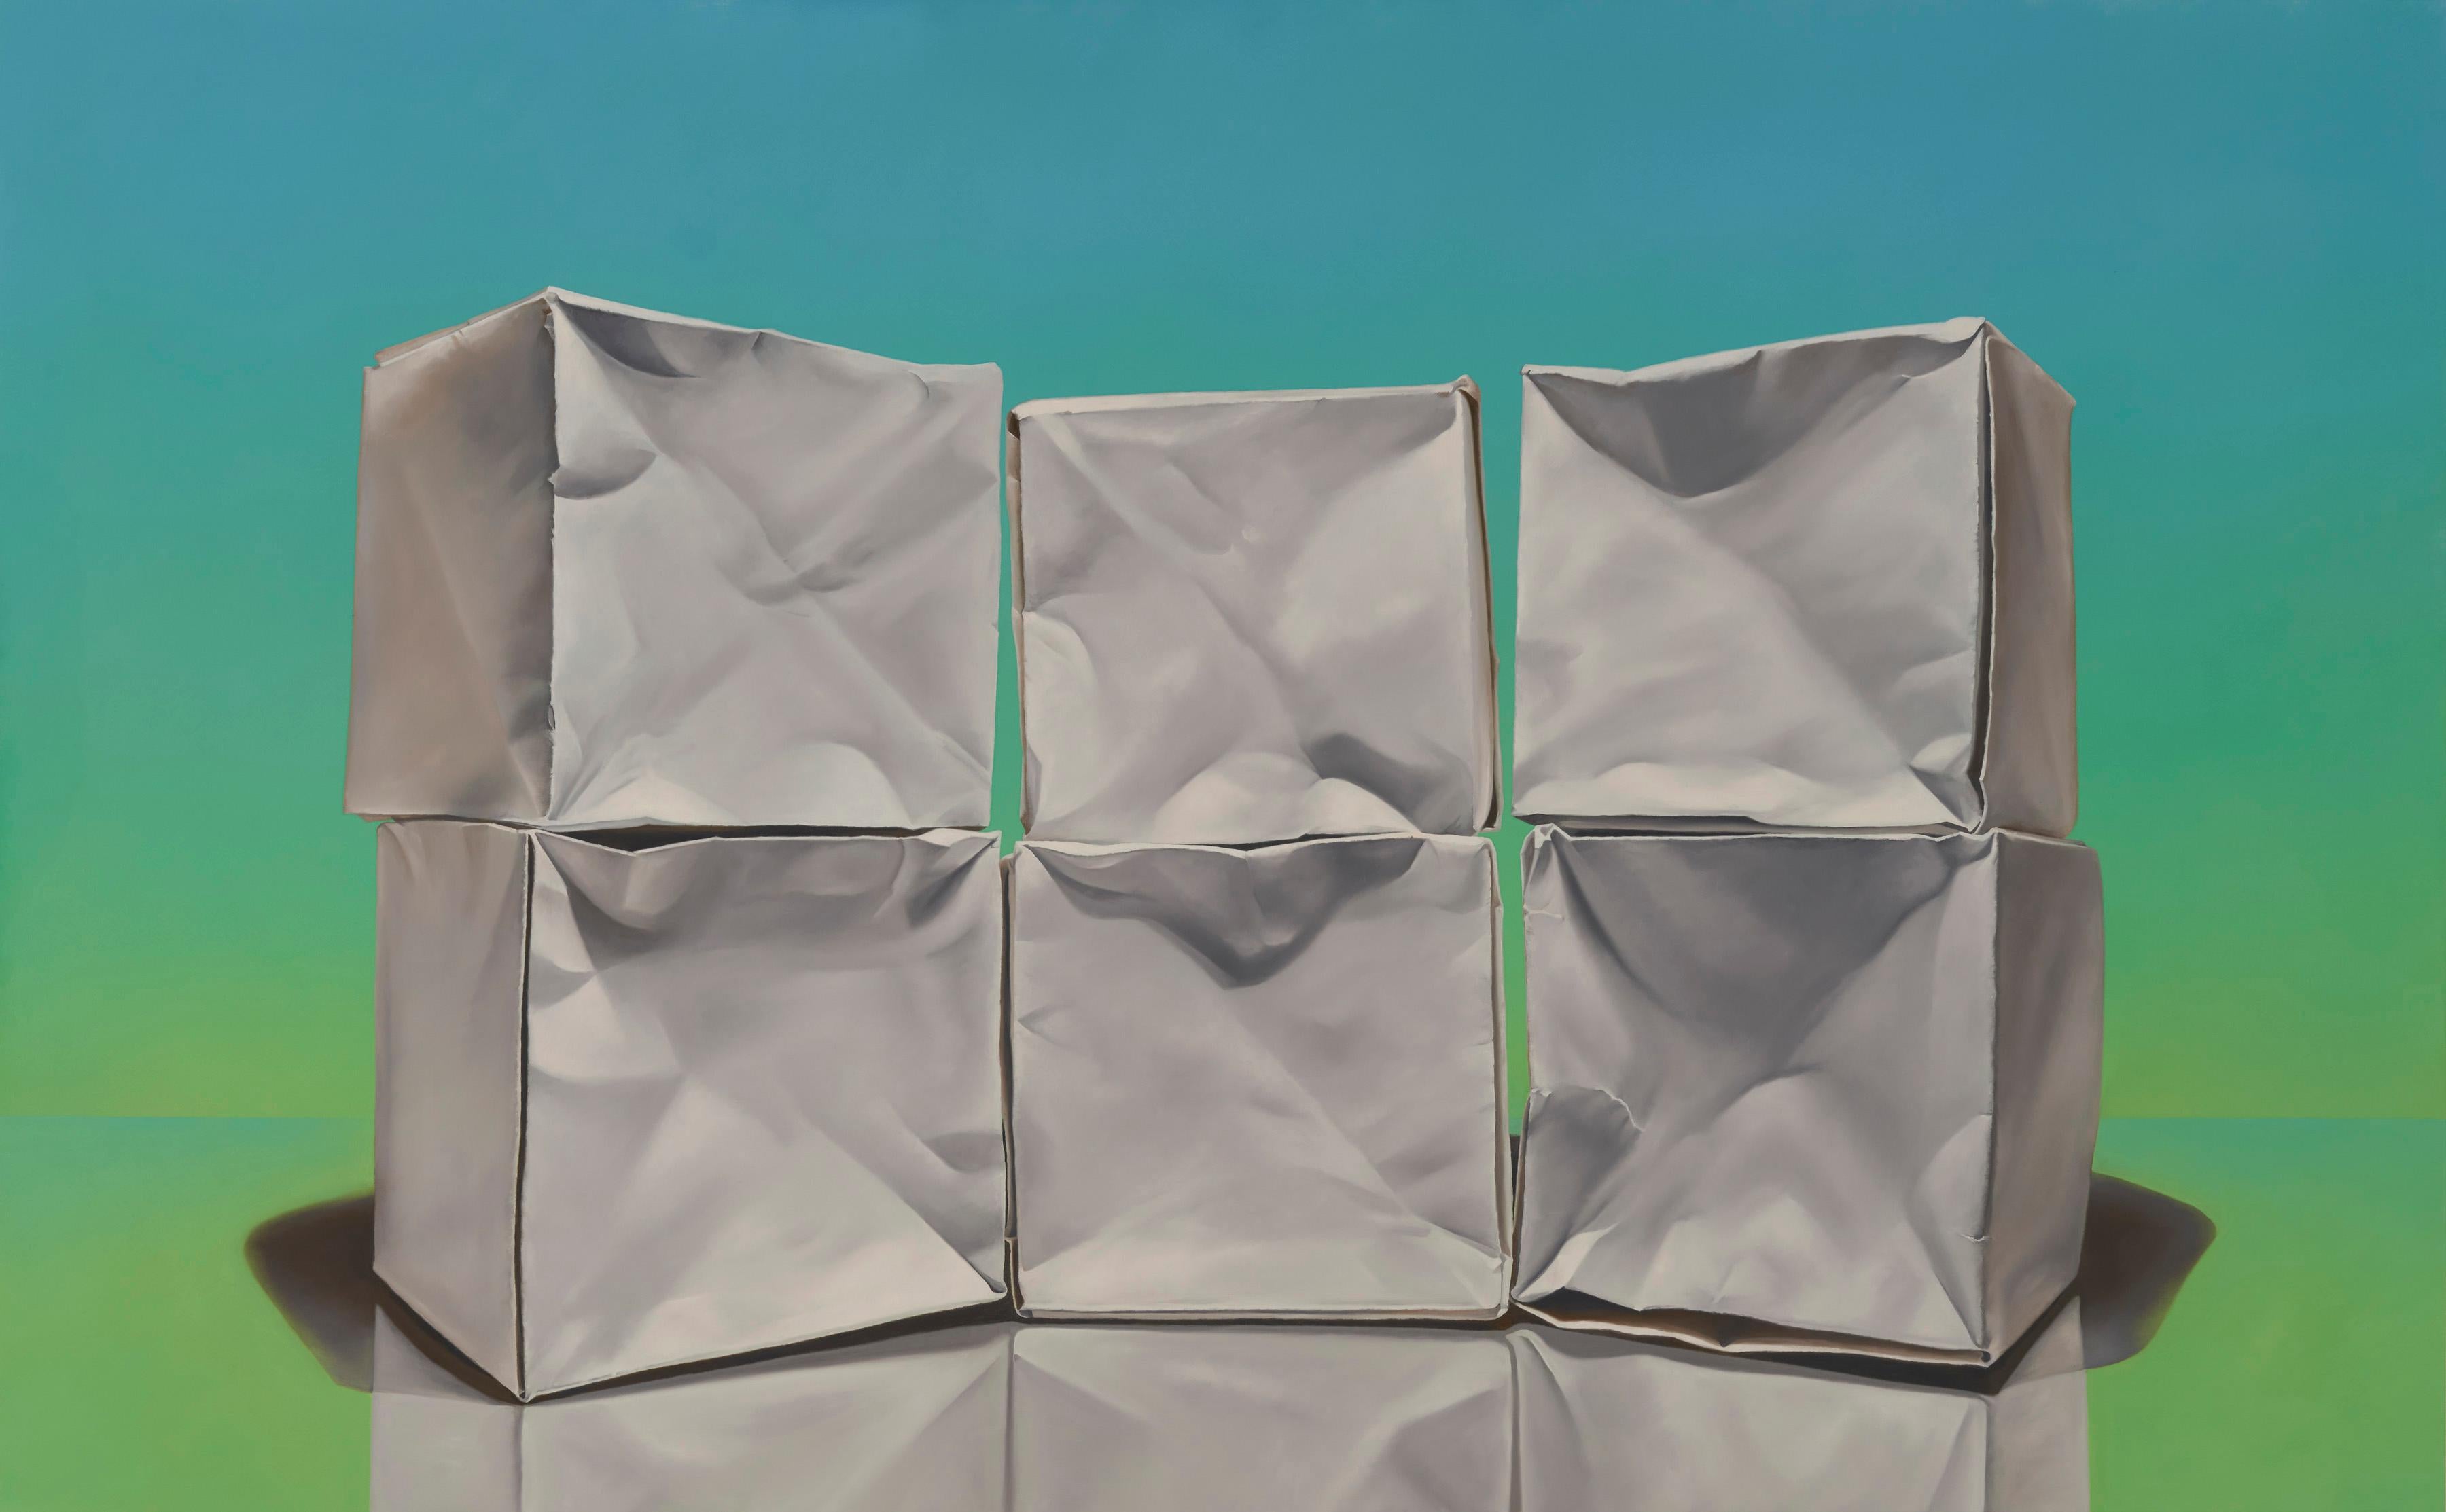 CUMULUS - Contemporary Realism / Still Life with Origami / High Color Blue-Green